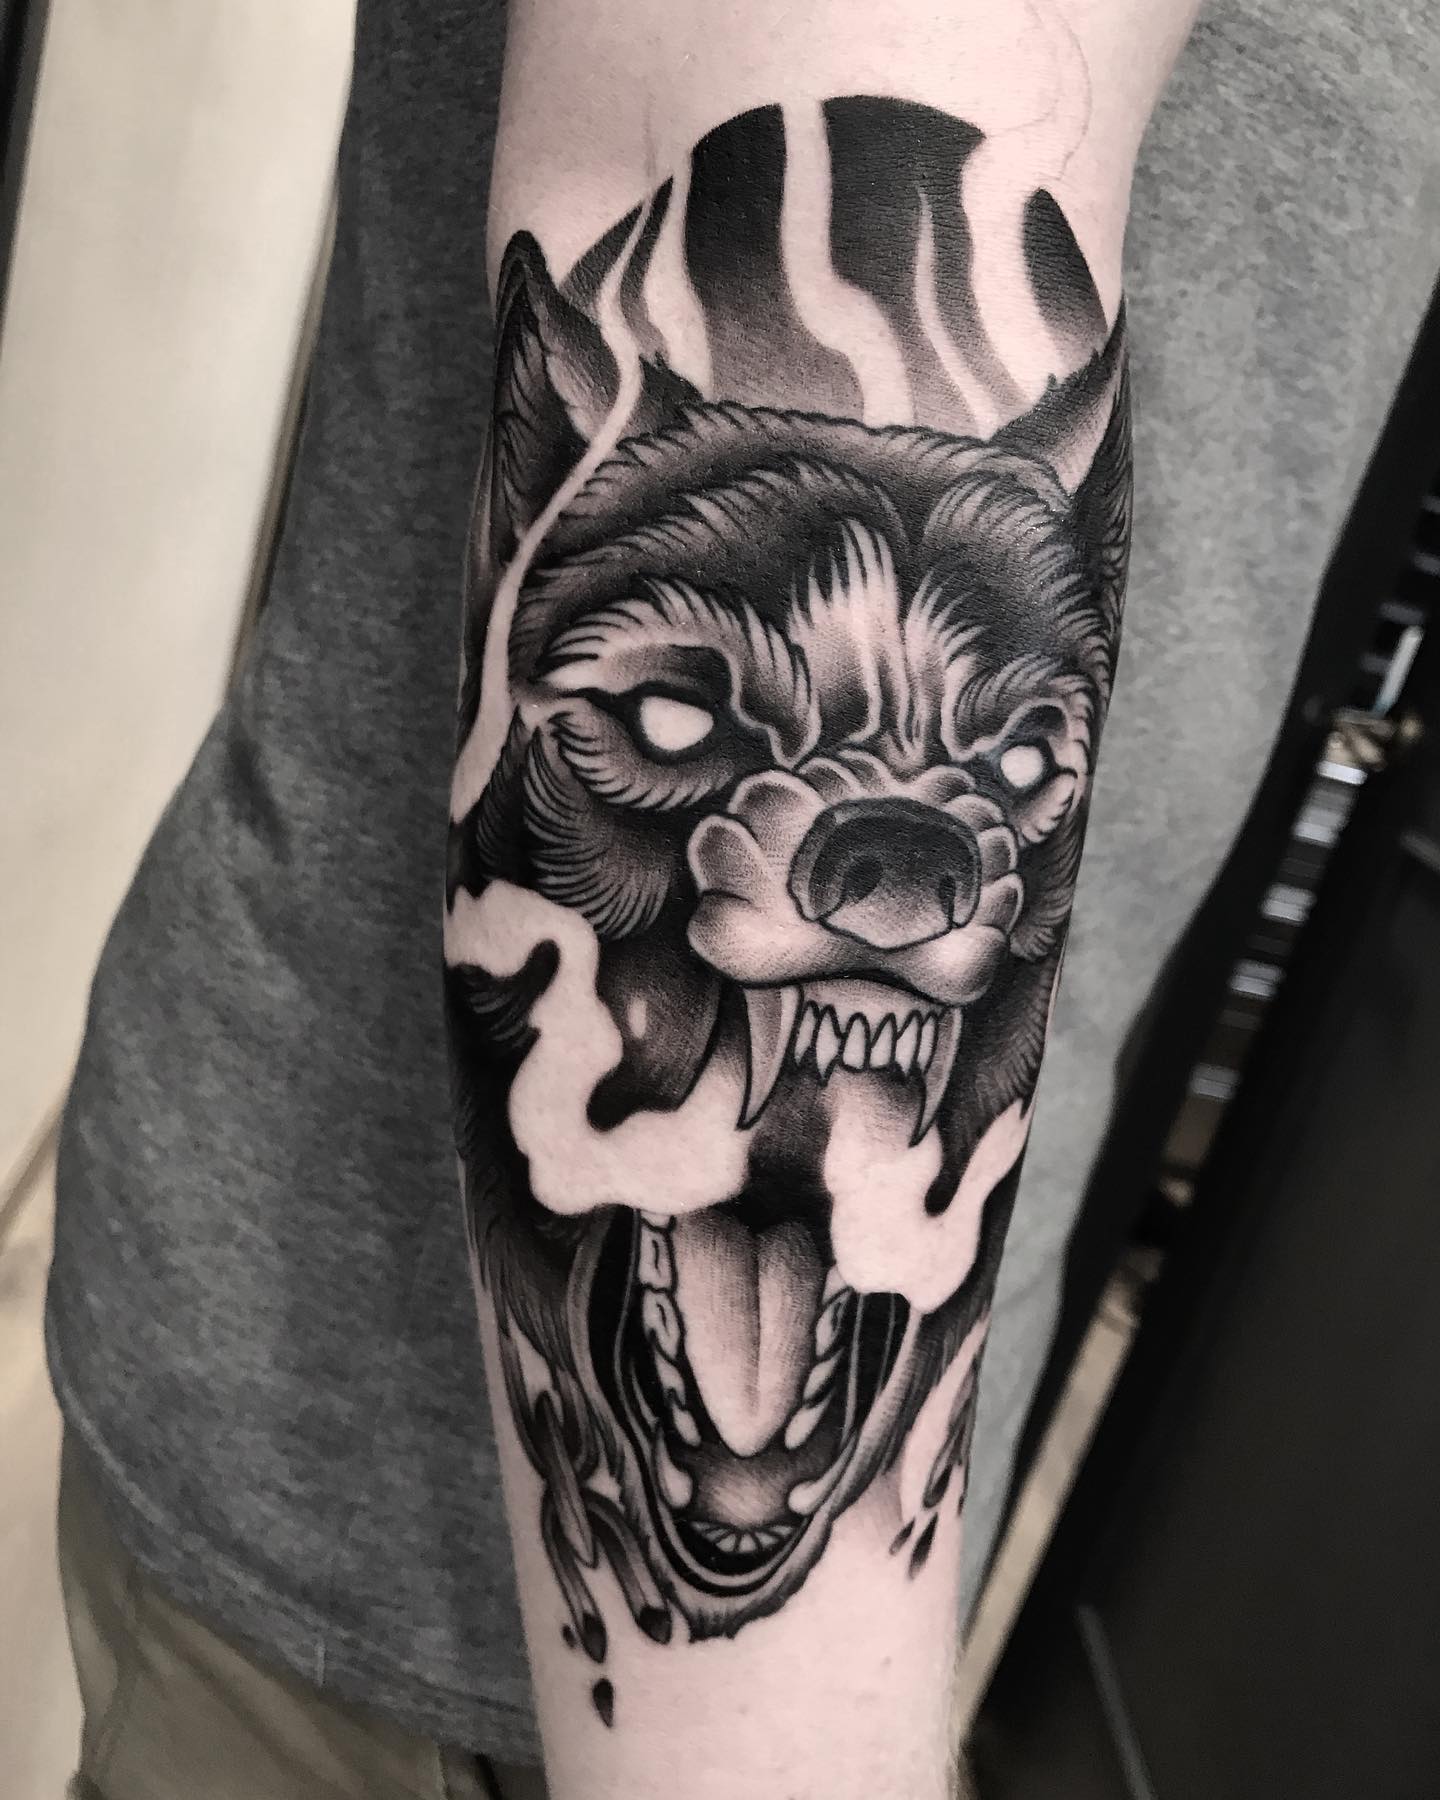 This dreadful wolf tattoo design will be perfect on your forearm.